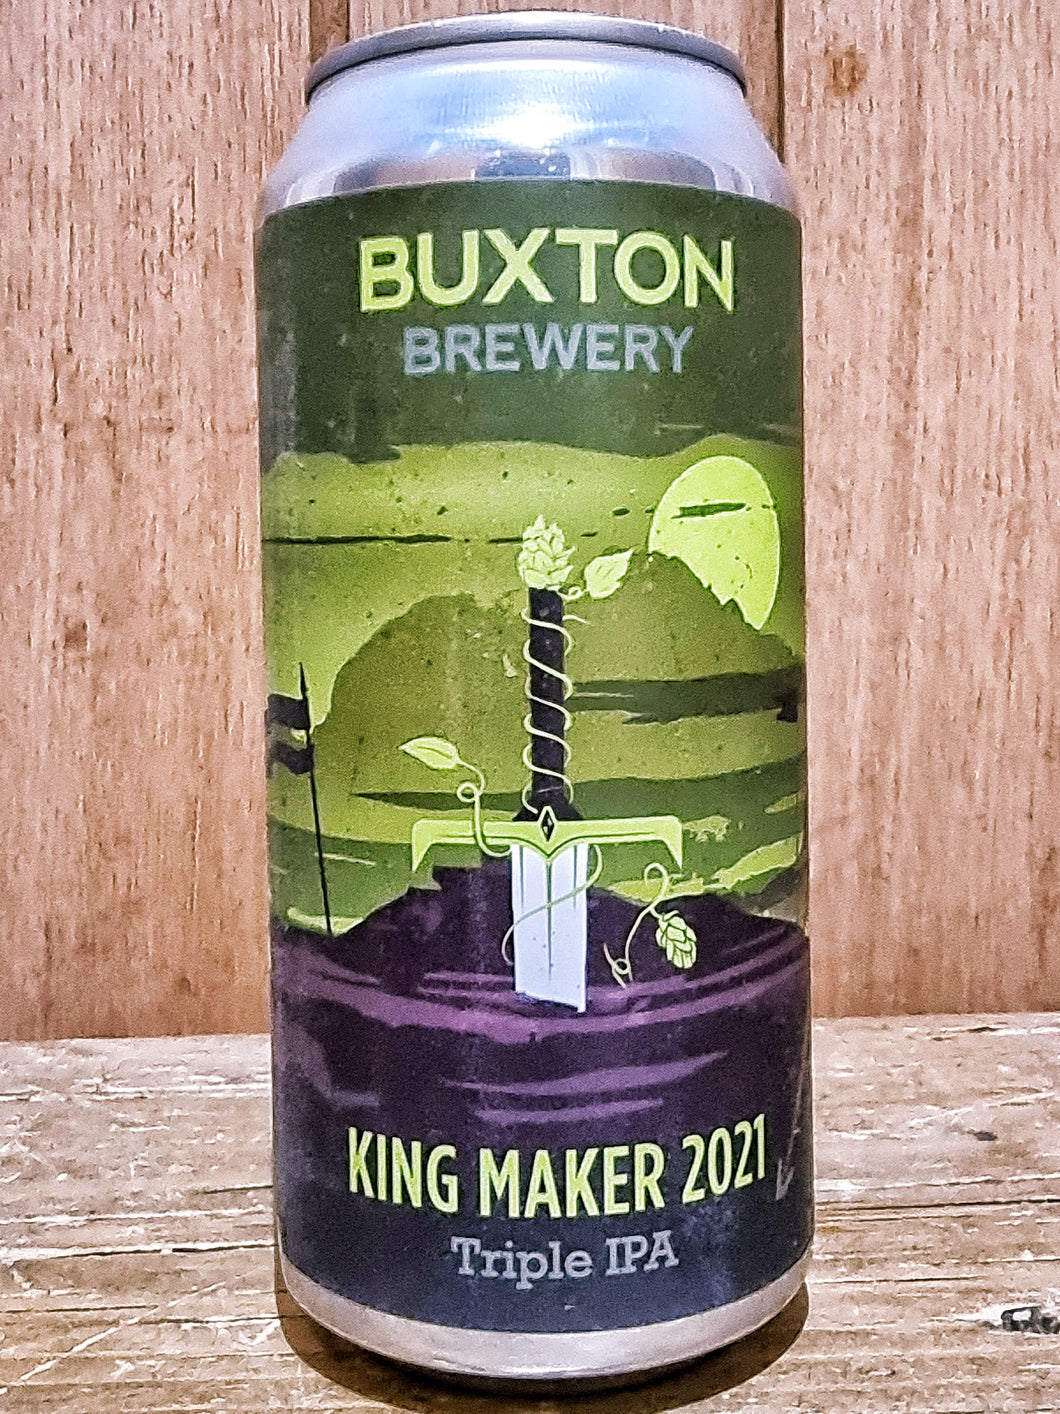 Buxton Brewery - King Maker 2021